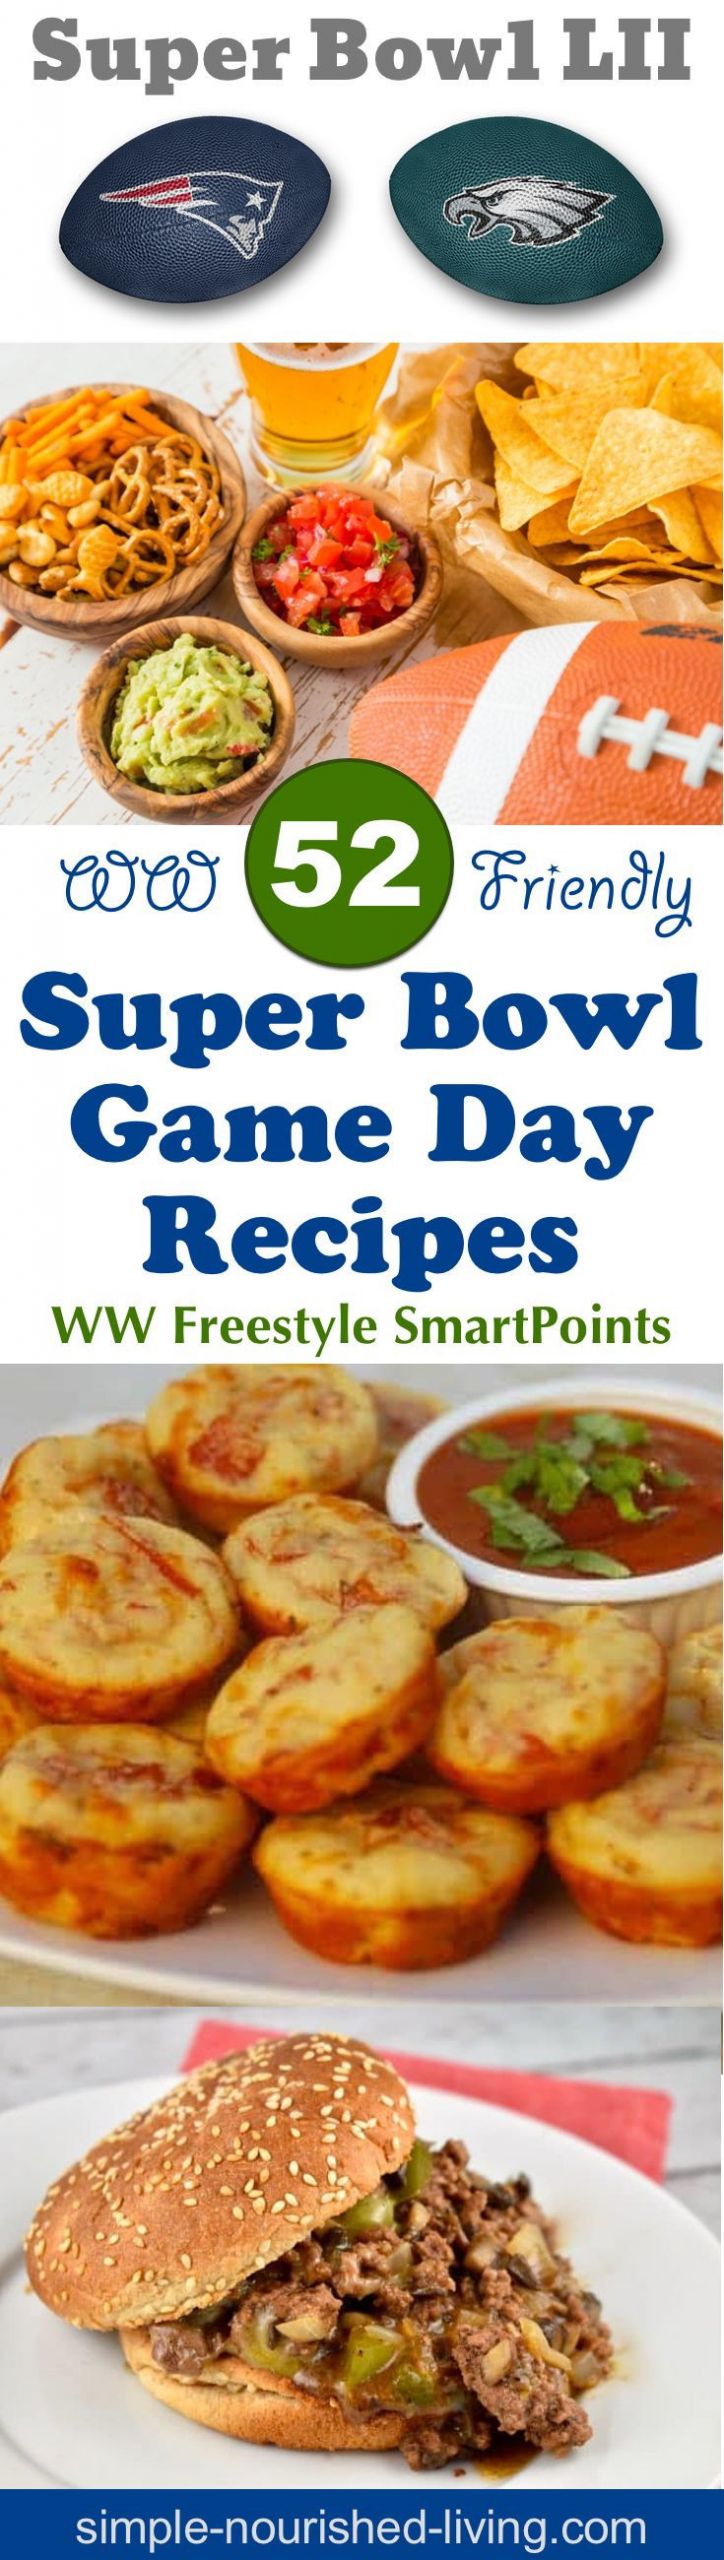 Weight Watchers Super Bowl Recipes
 The 23 Best Ideas for Weight Watchers Super Bowl Recipes